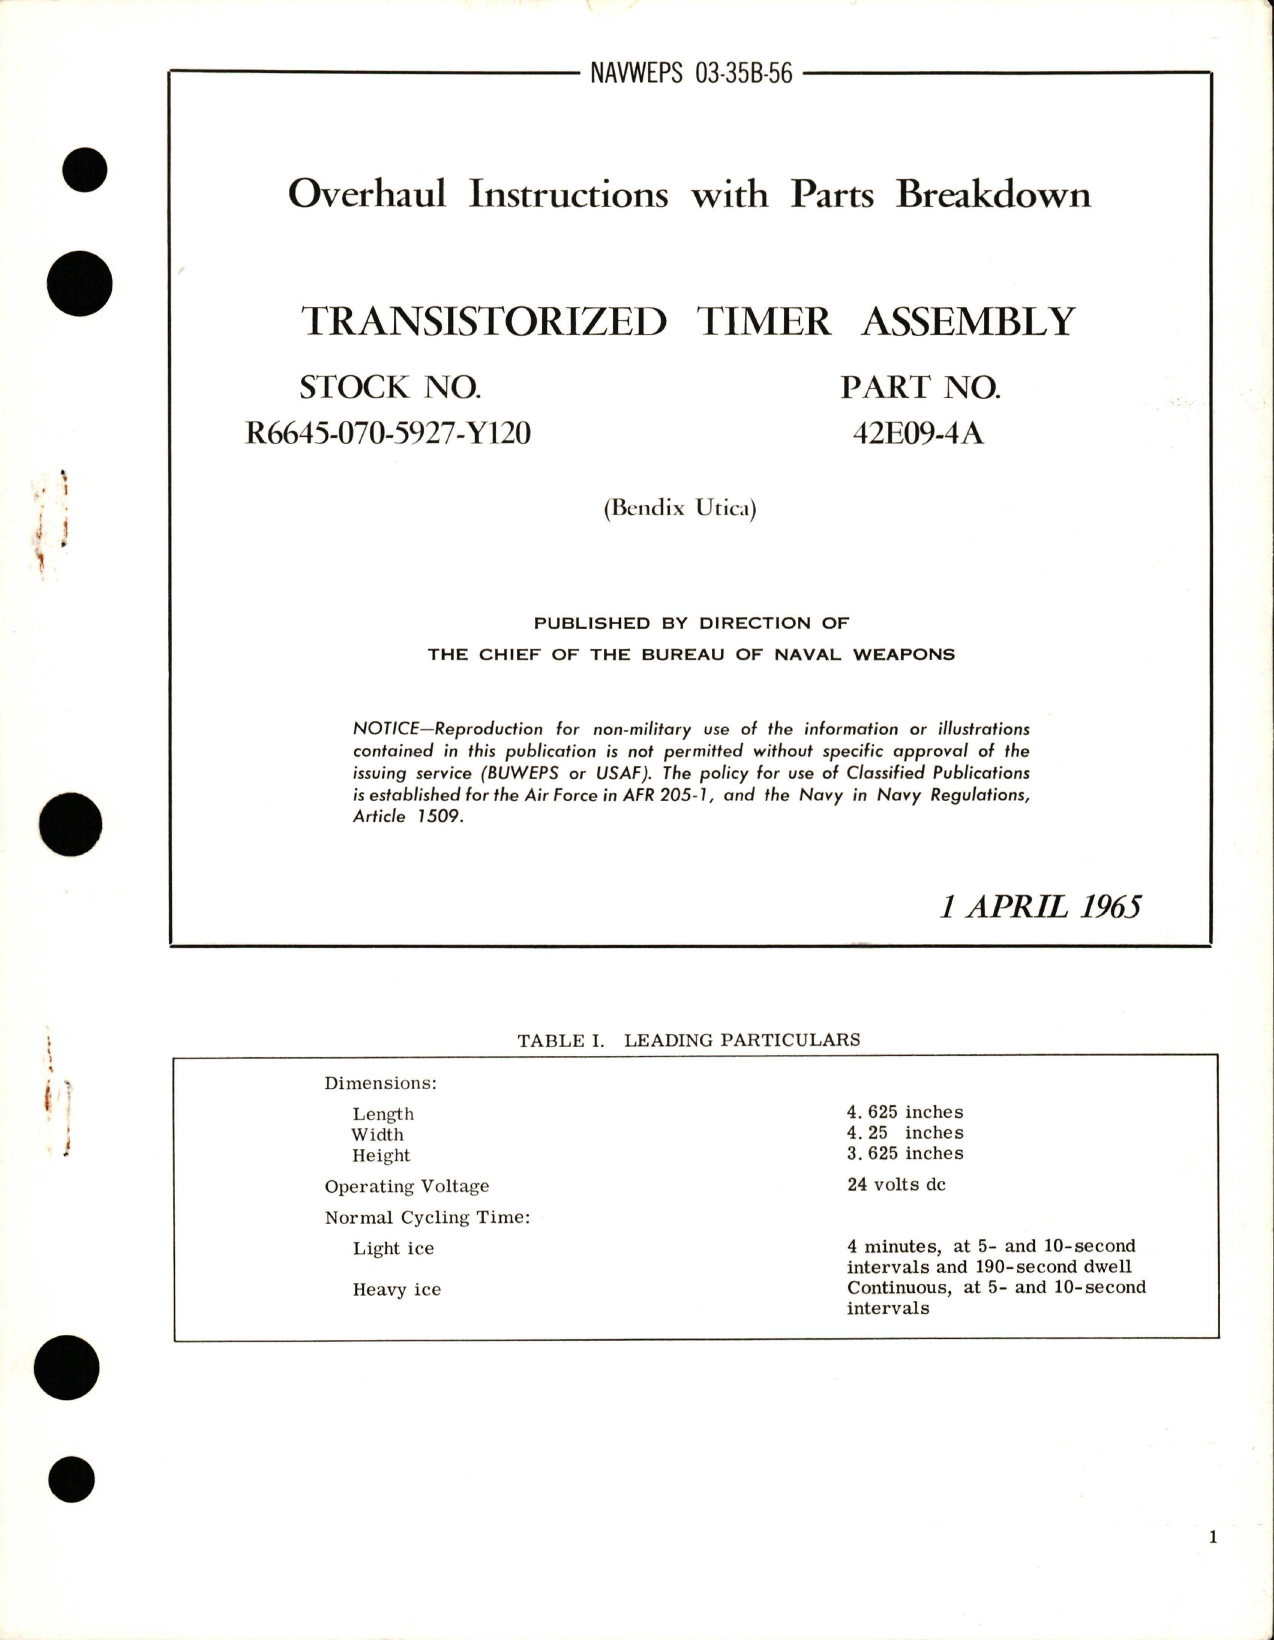 Sample page 1 from AirCorps Library document: Overhaul Instructions with Parts Breakdown for Transistorized Timer Assembly - Part 42E09-4A 